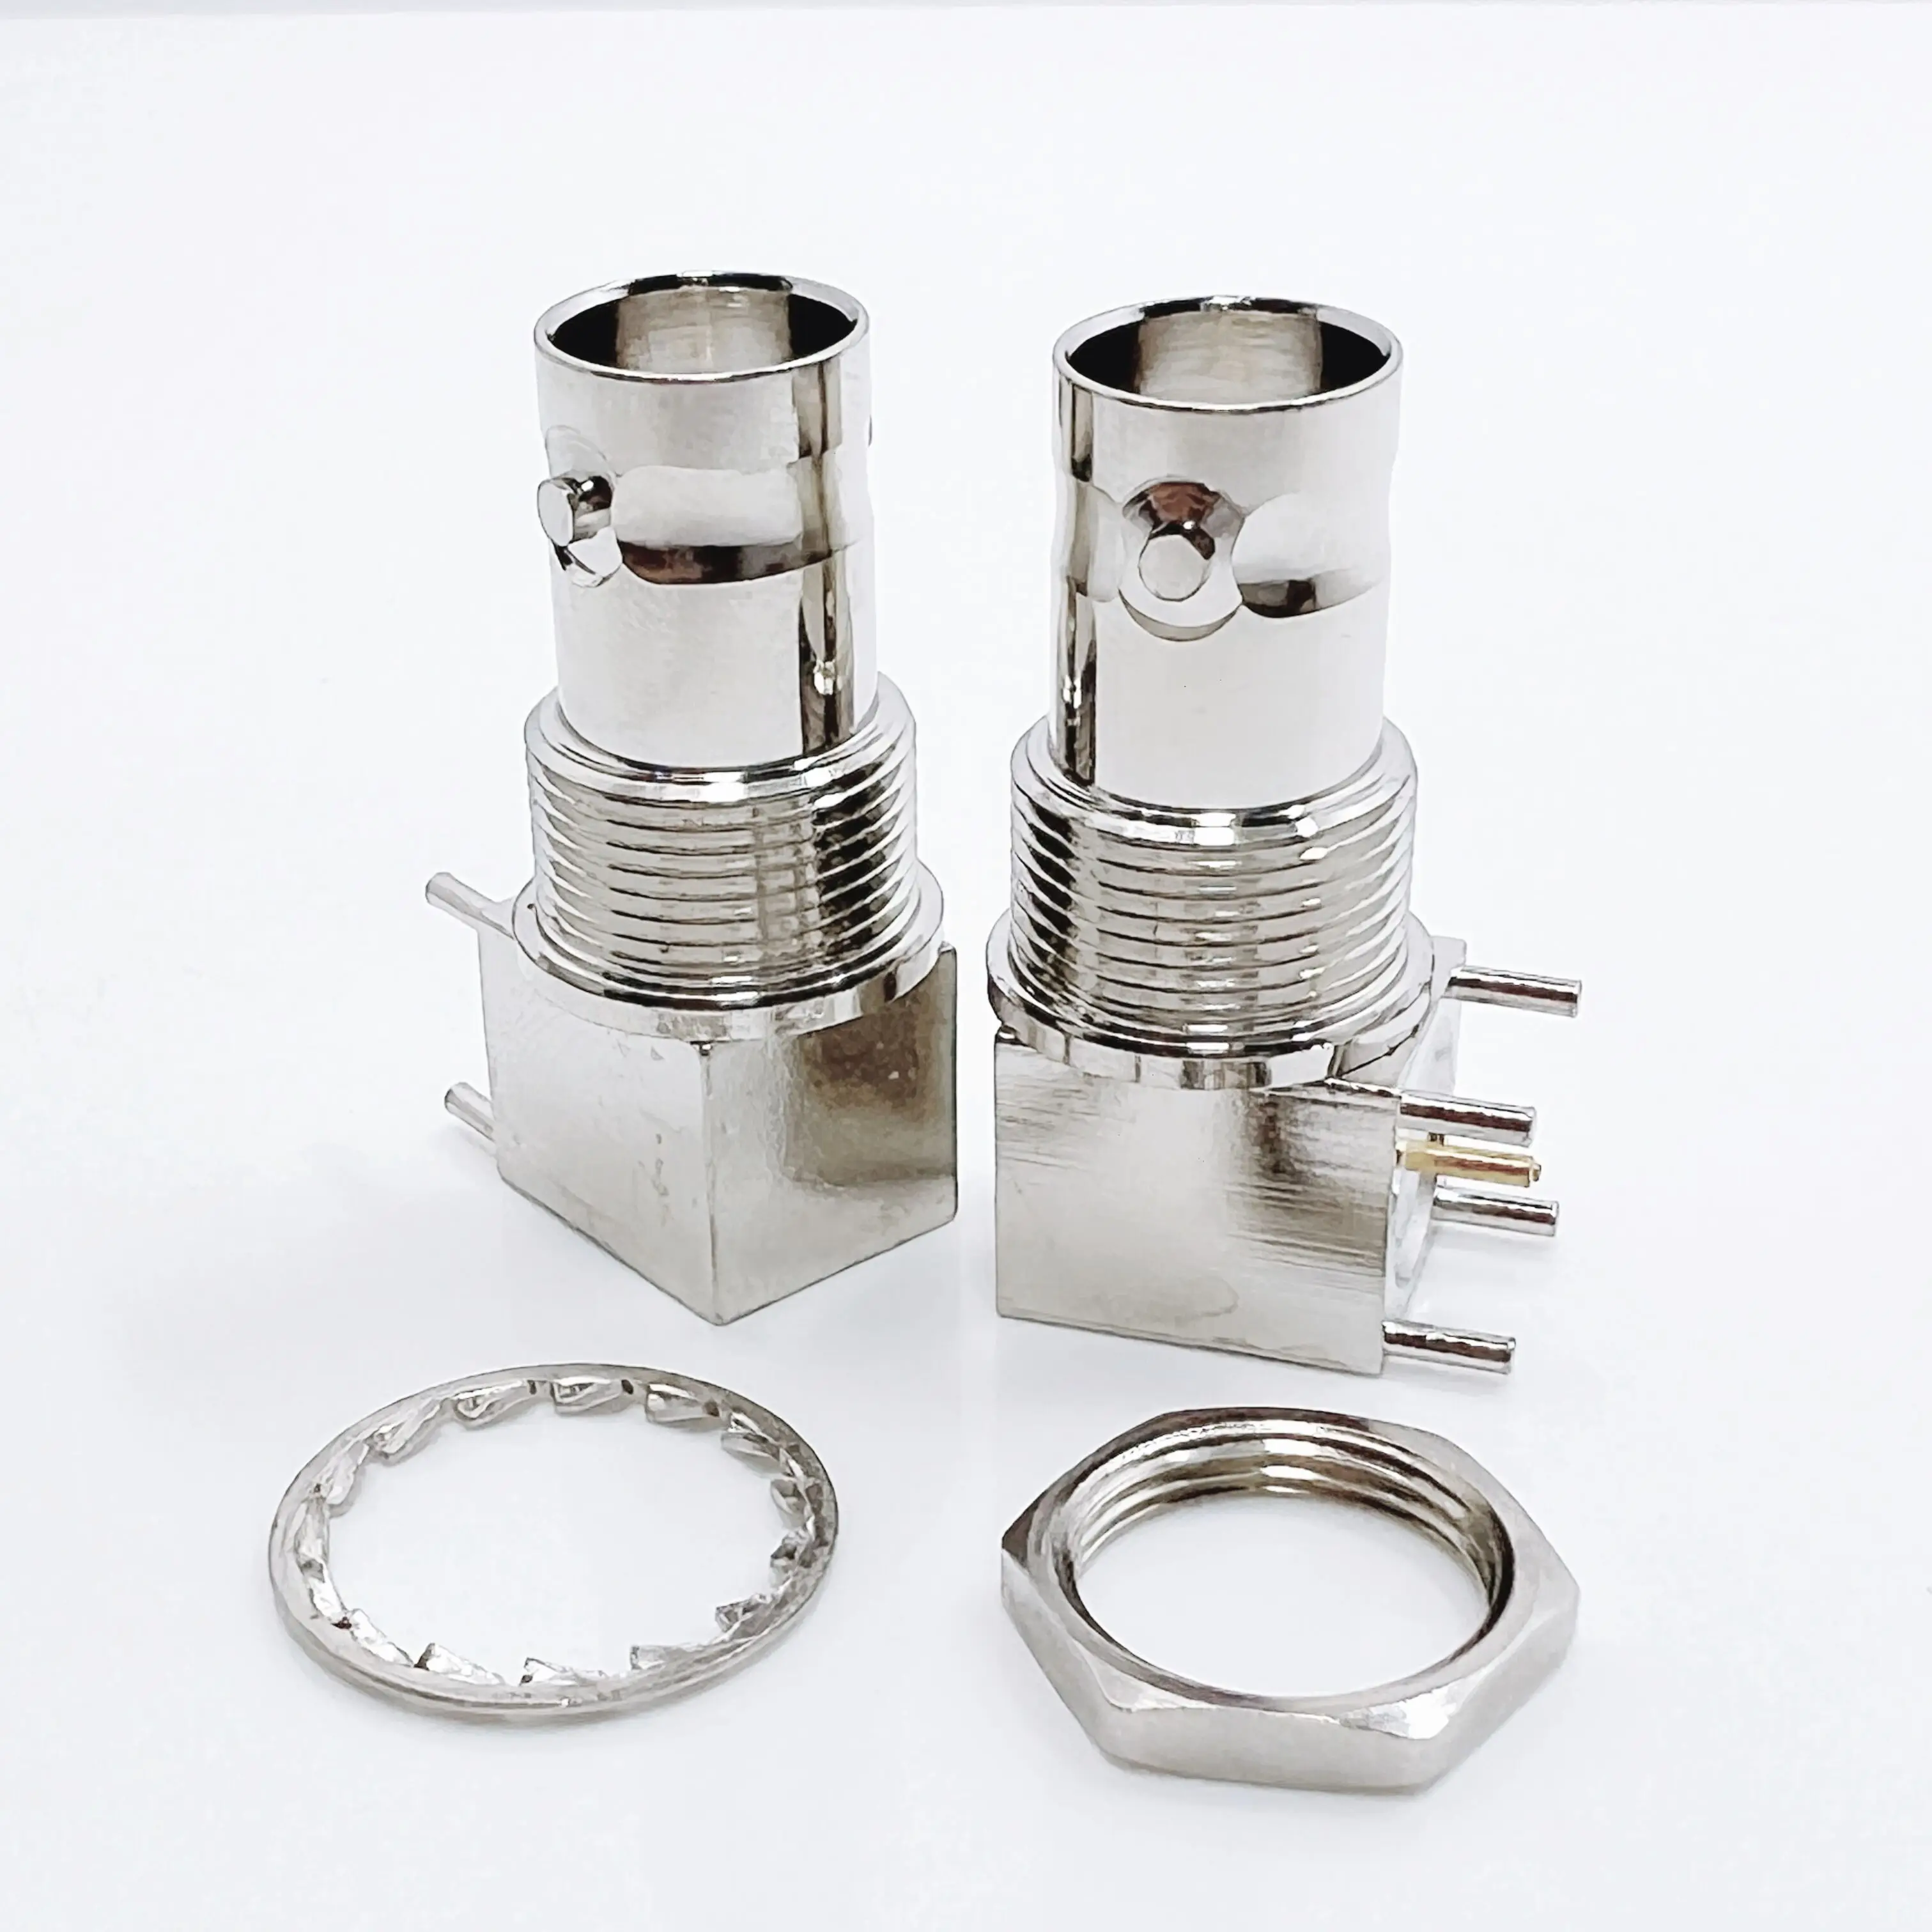 Nickel Plated BNC Jack Bulkhead Right Angle RF Connector PCB 2 Mount manufacture